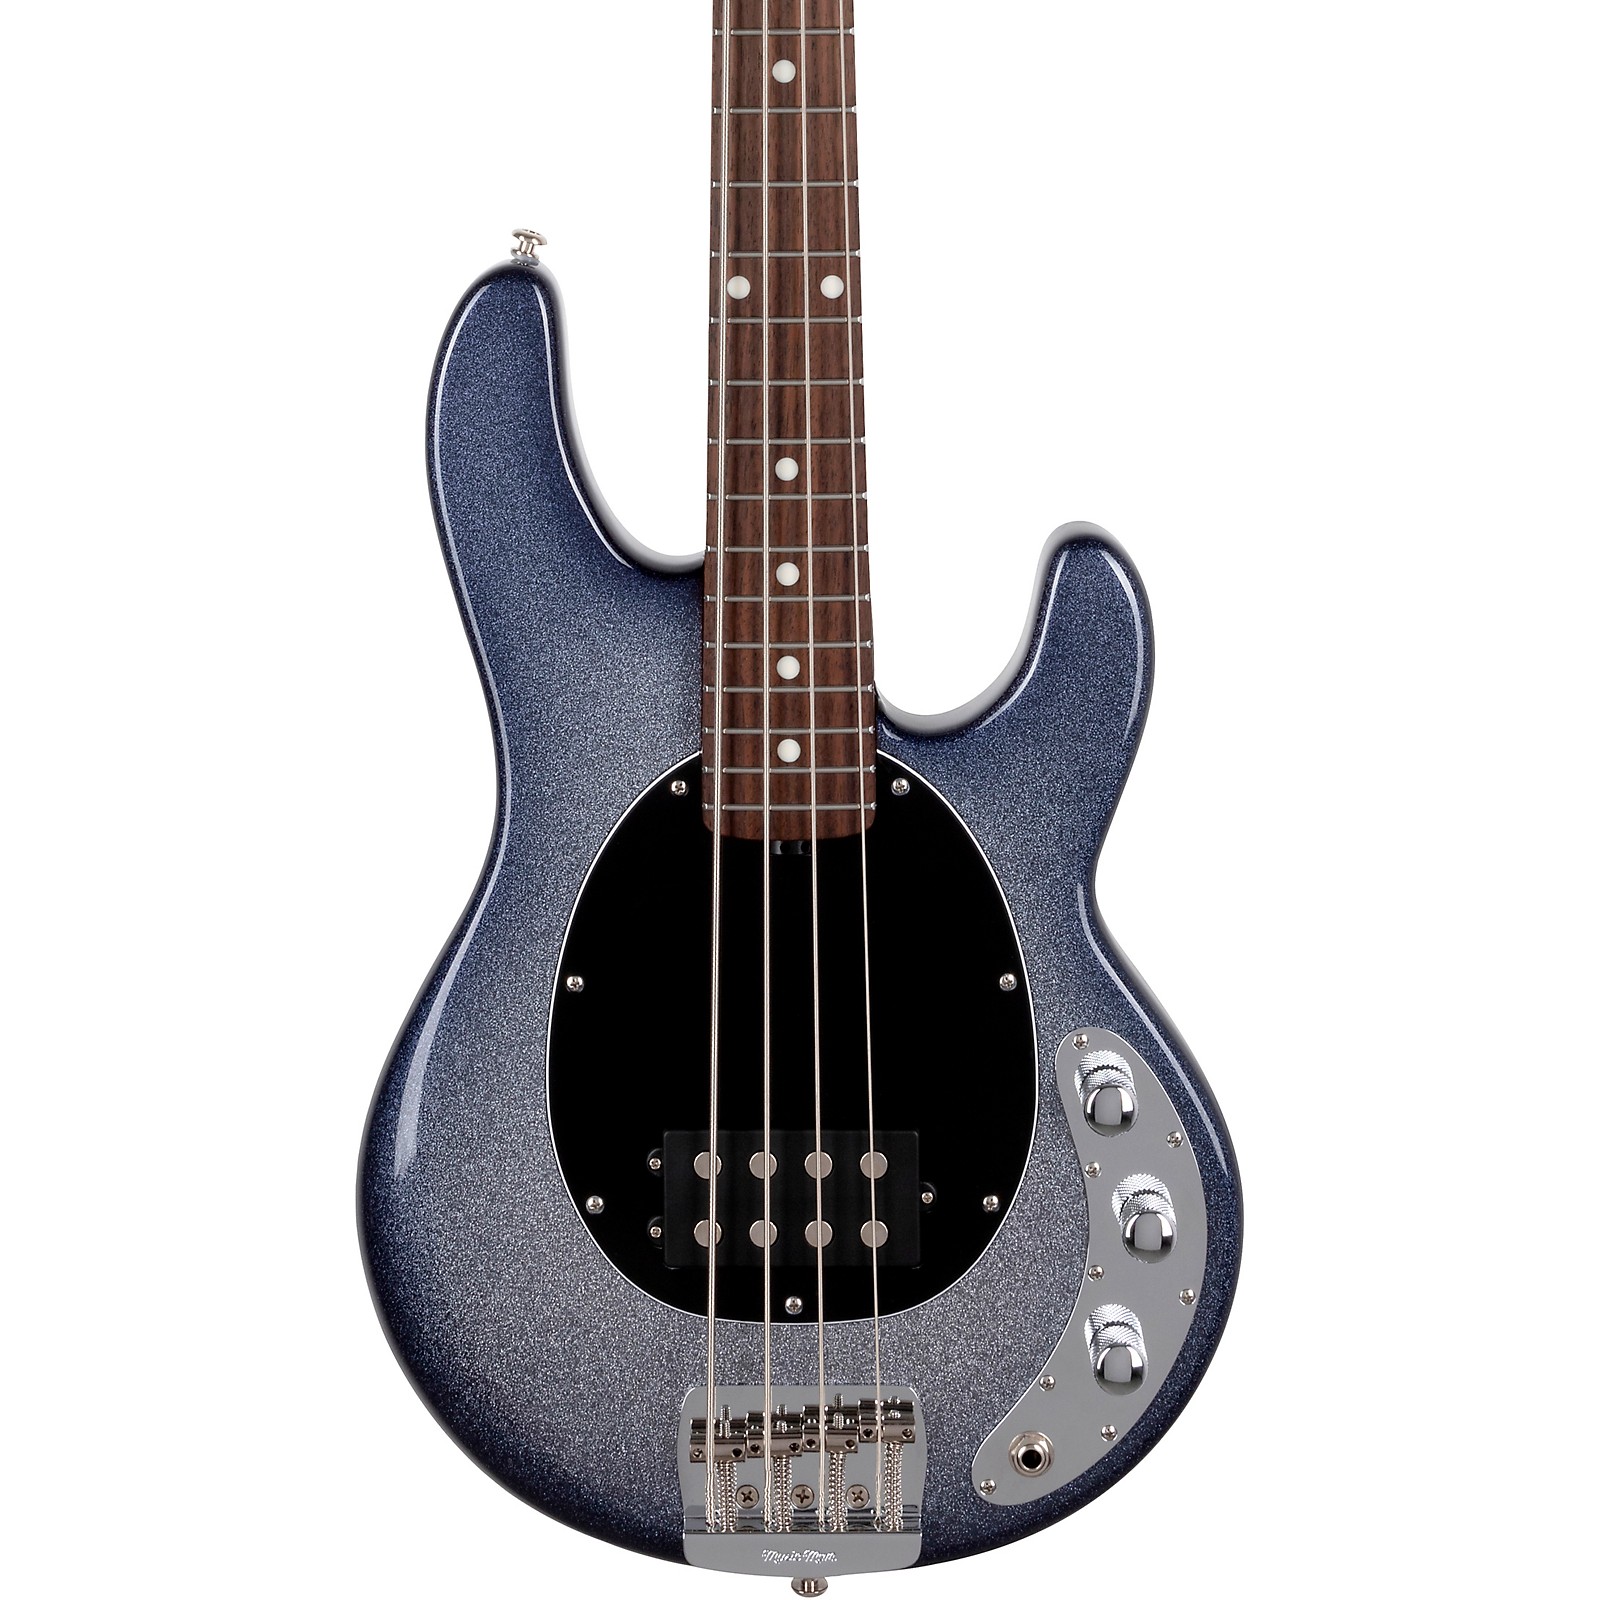 Ernie Ball Music Man Short-Scale StingRay Bass Roasted Maple Neck with Rosewood Fingerboard